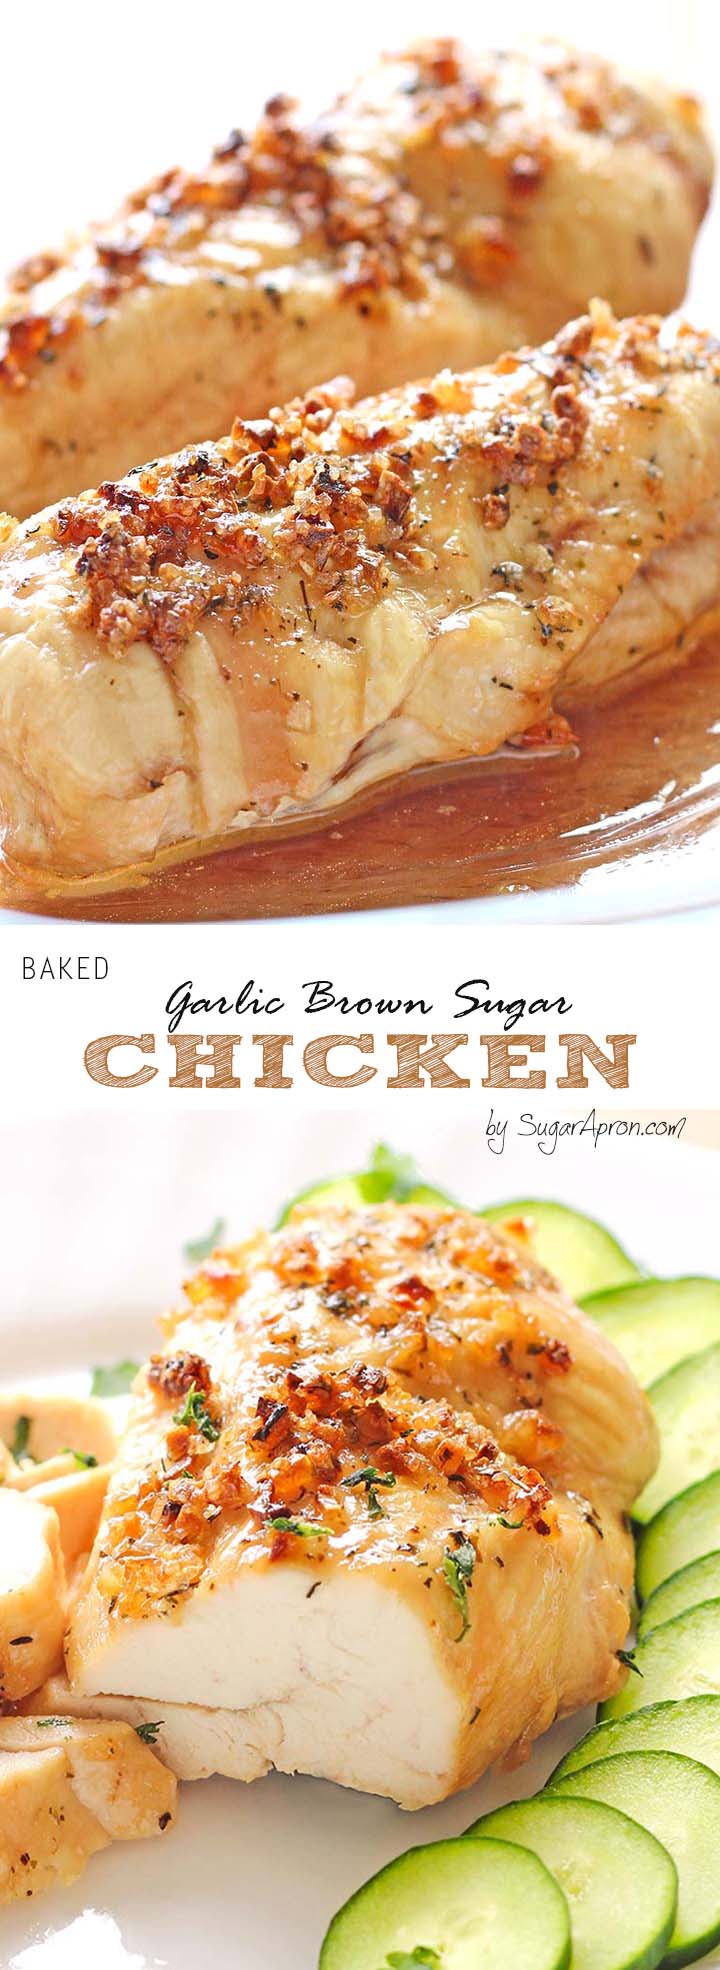 if you want to cheer your senses with a dish that seems like ordered in an exclusive restaurant, in addition to the fact that you personally made it a very easy way, then this garlic brown sugar chicken is the right choice for you.